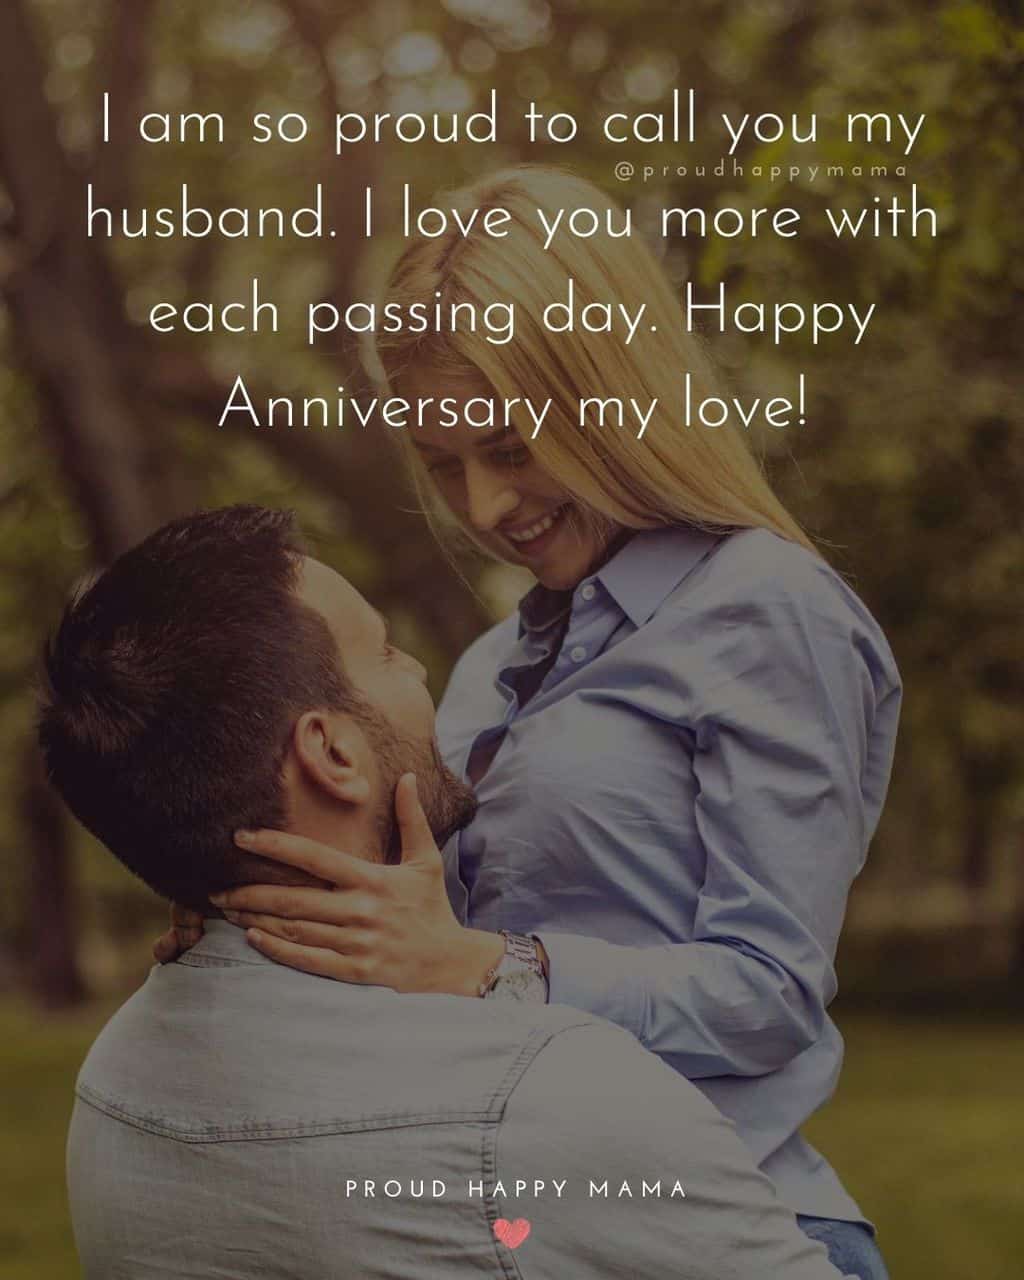 100+ BEST Wedding Anniversary Wishes For Husband [With Images]